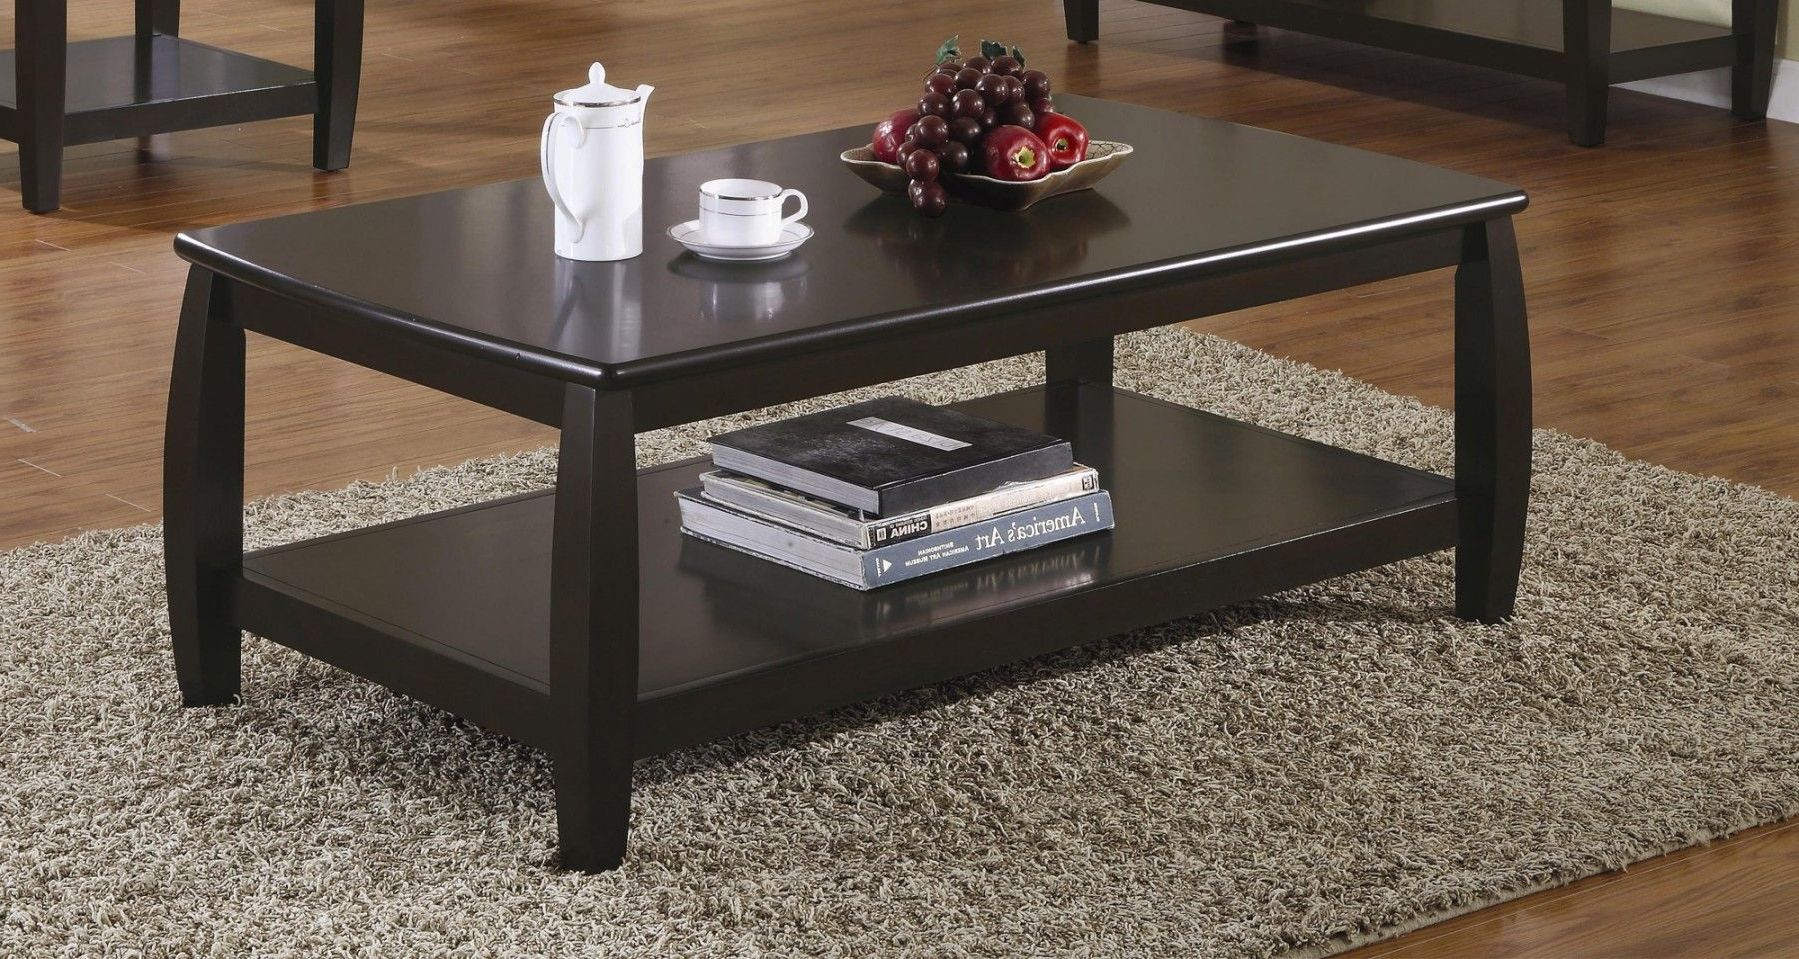 Coaster Wood Top Espresso Coffee Table With 1 Shelf Within Favorite 1 Shelf Coffee Tables (View 5 of 20)